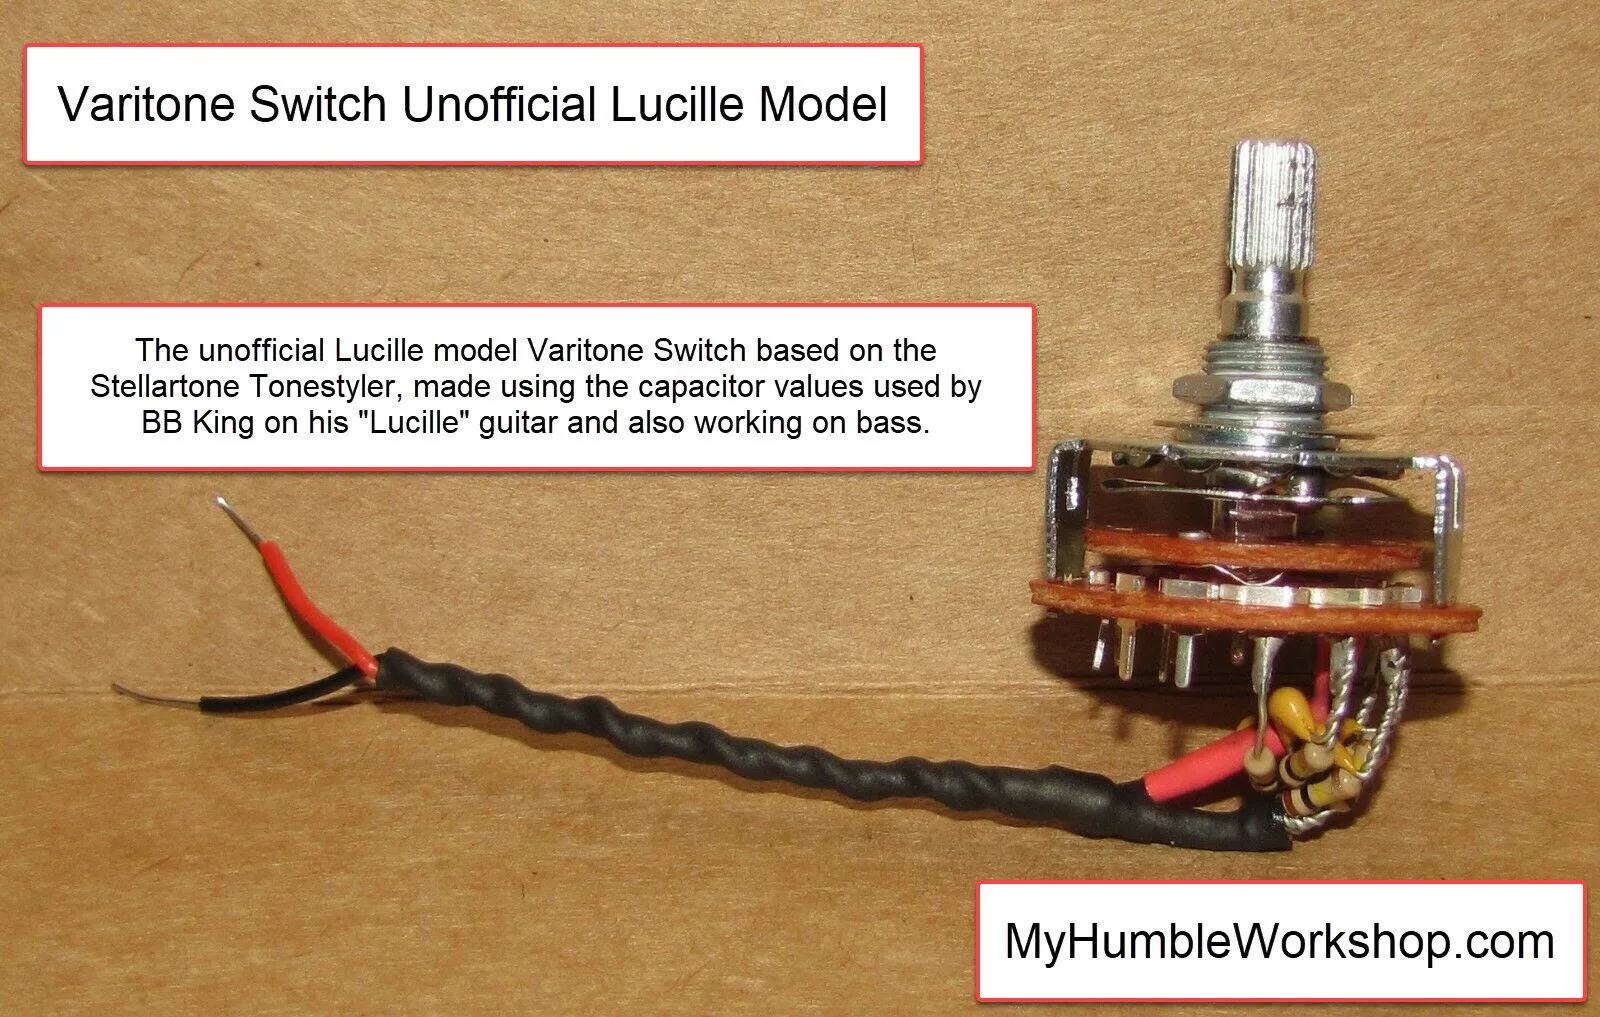 Varitone Switch Unofficial Lucille Model